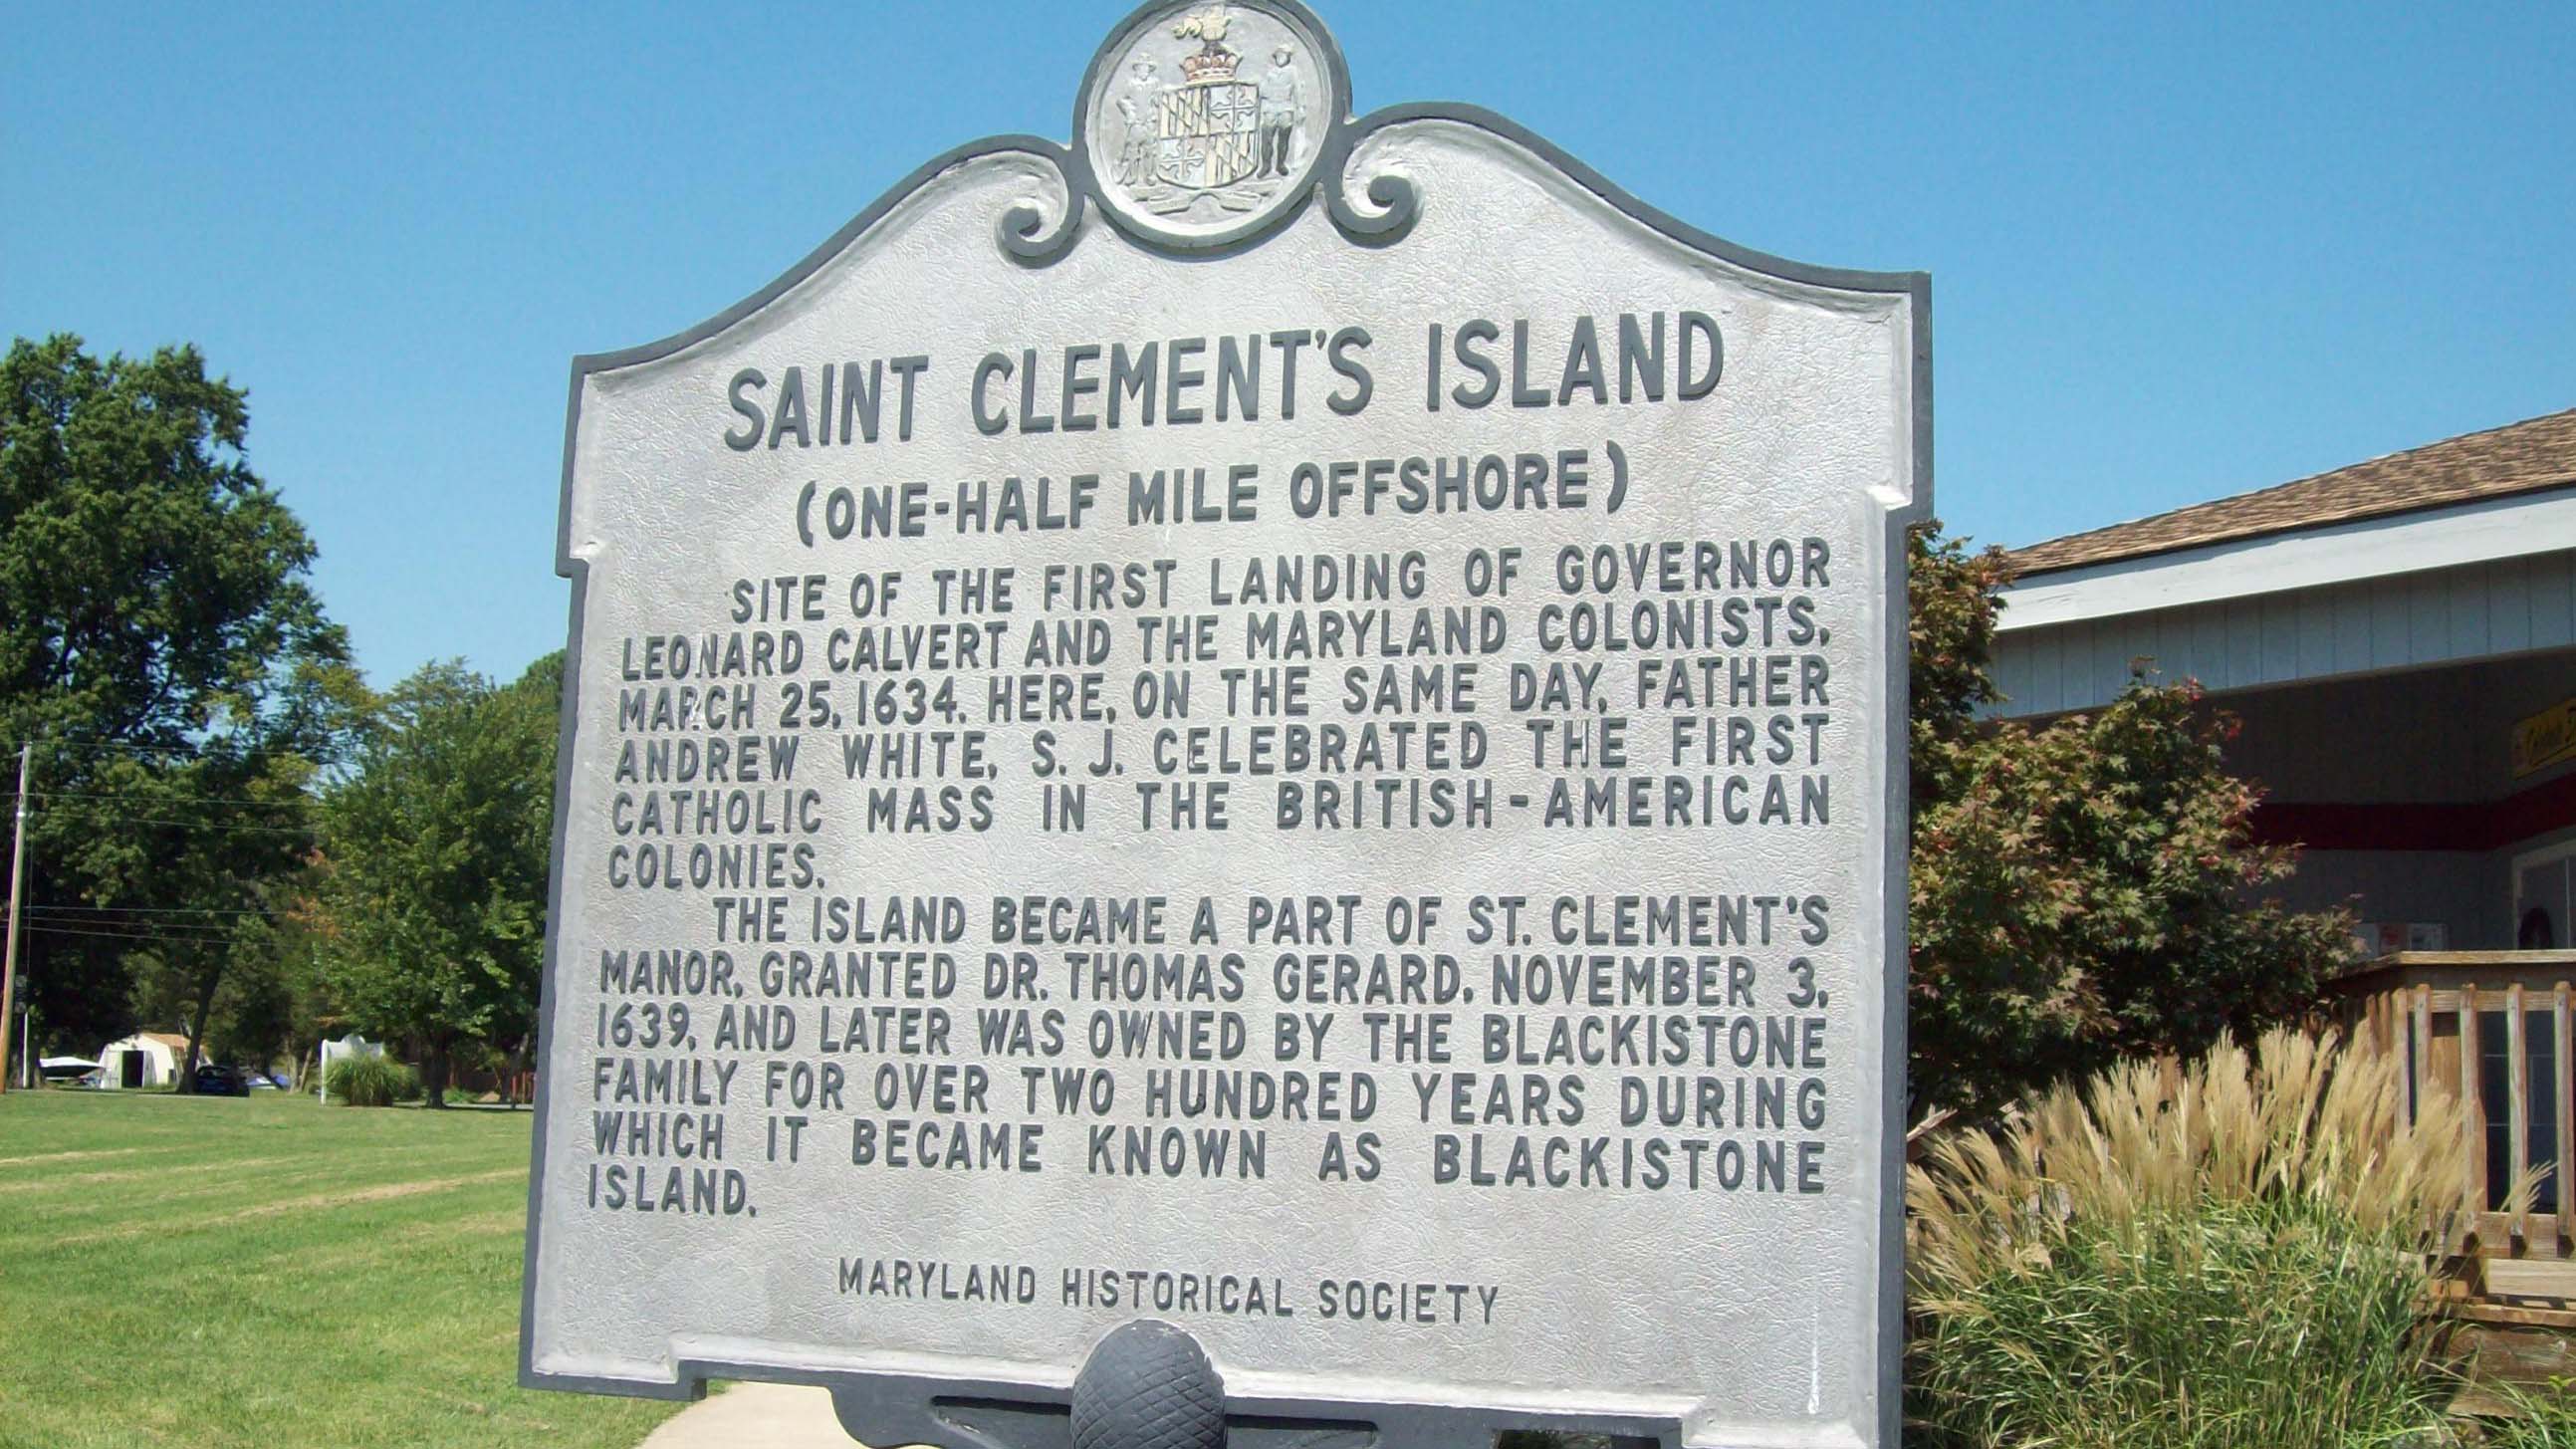 St. Clement's Island